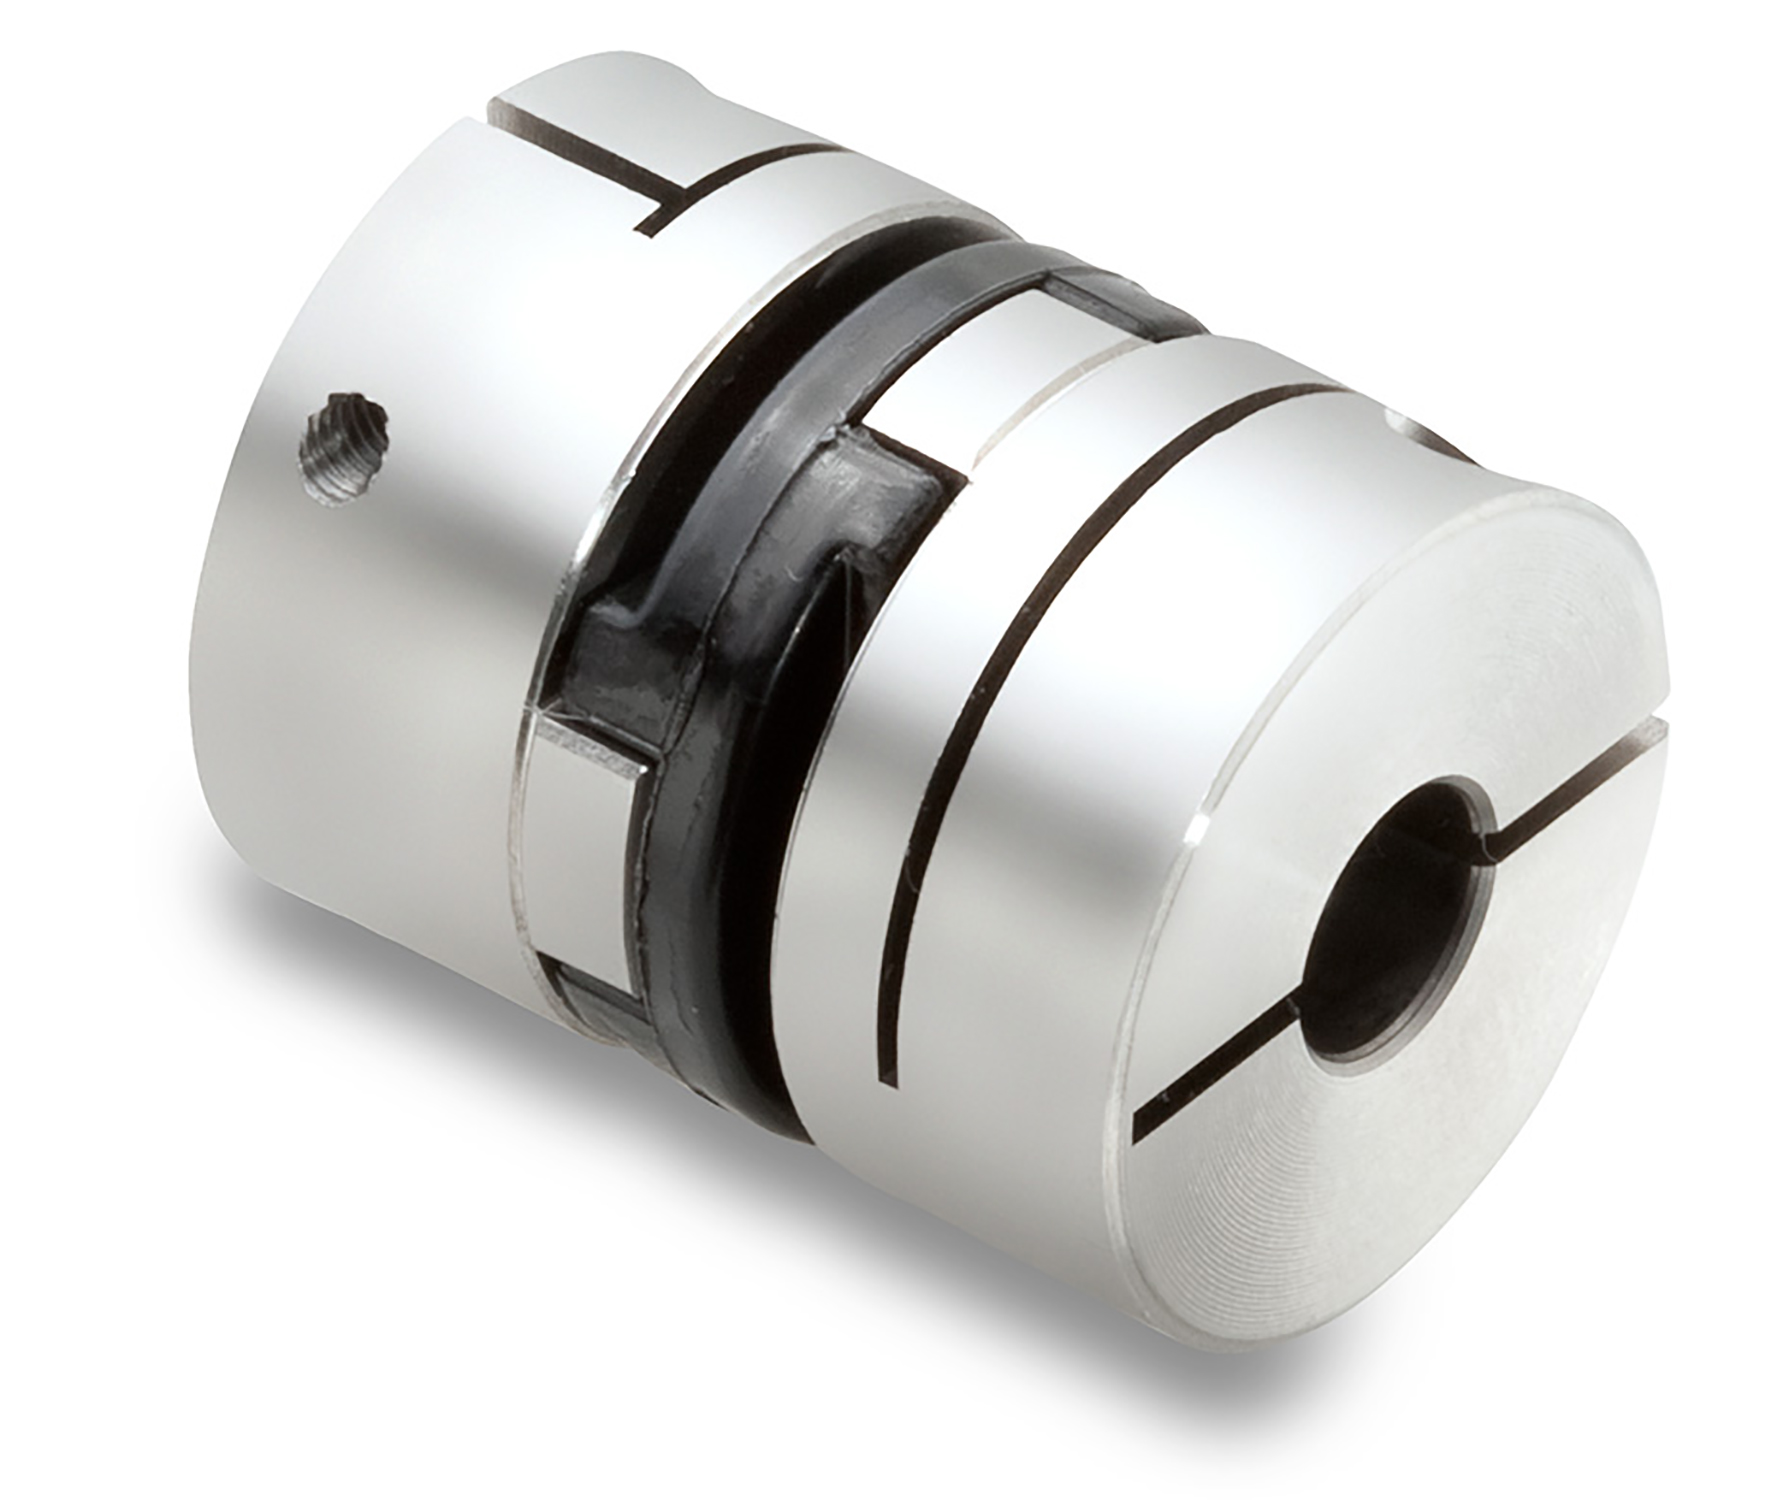 Huco will highlight its exceptional range of standard and customised precision couplings for a wide range of power transmission applications during the show.